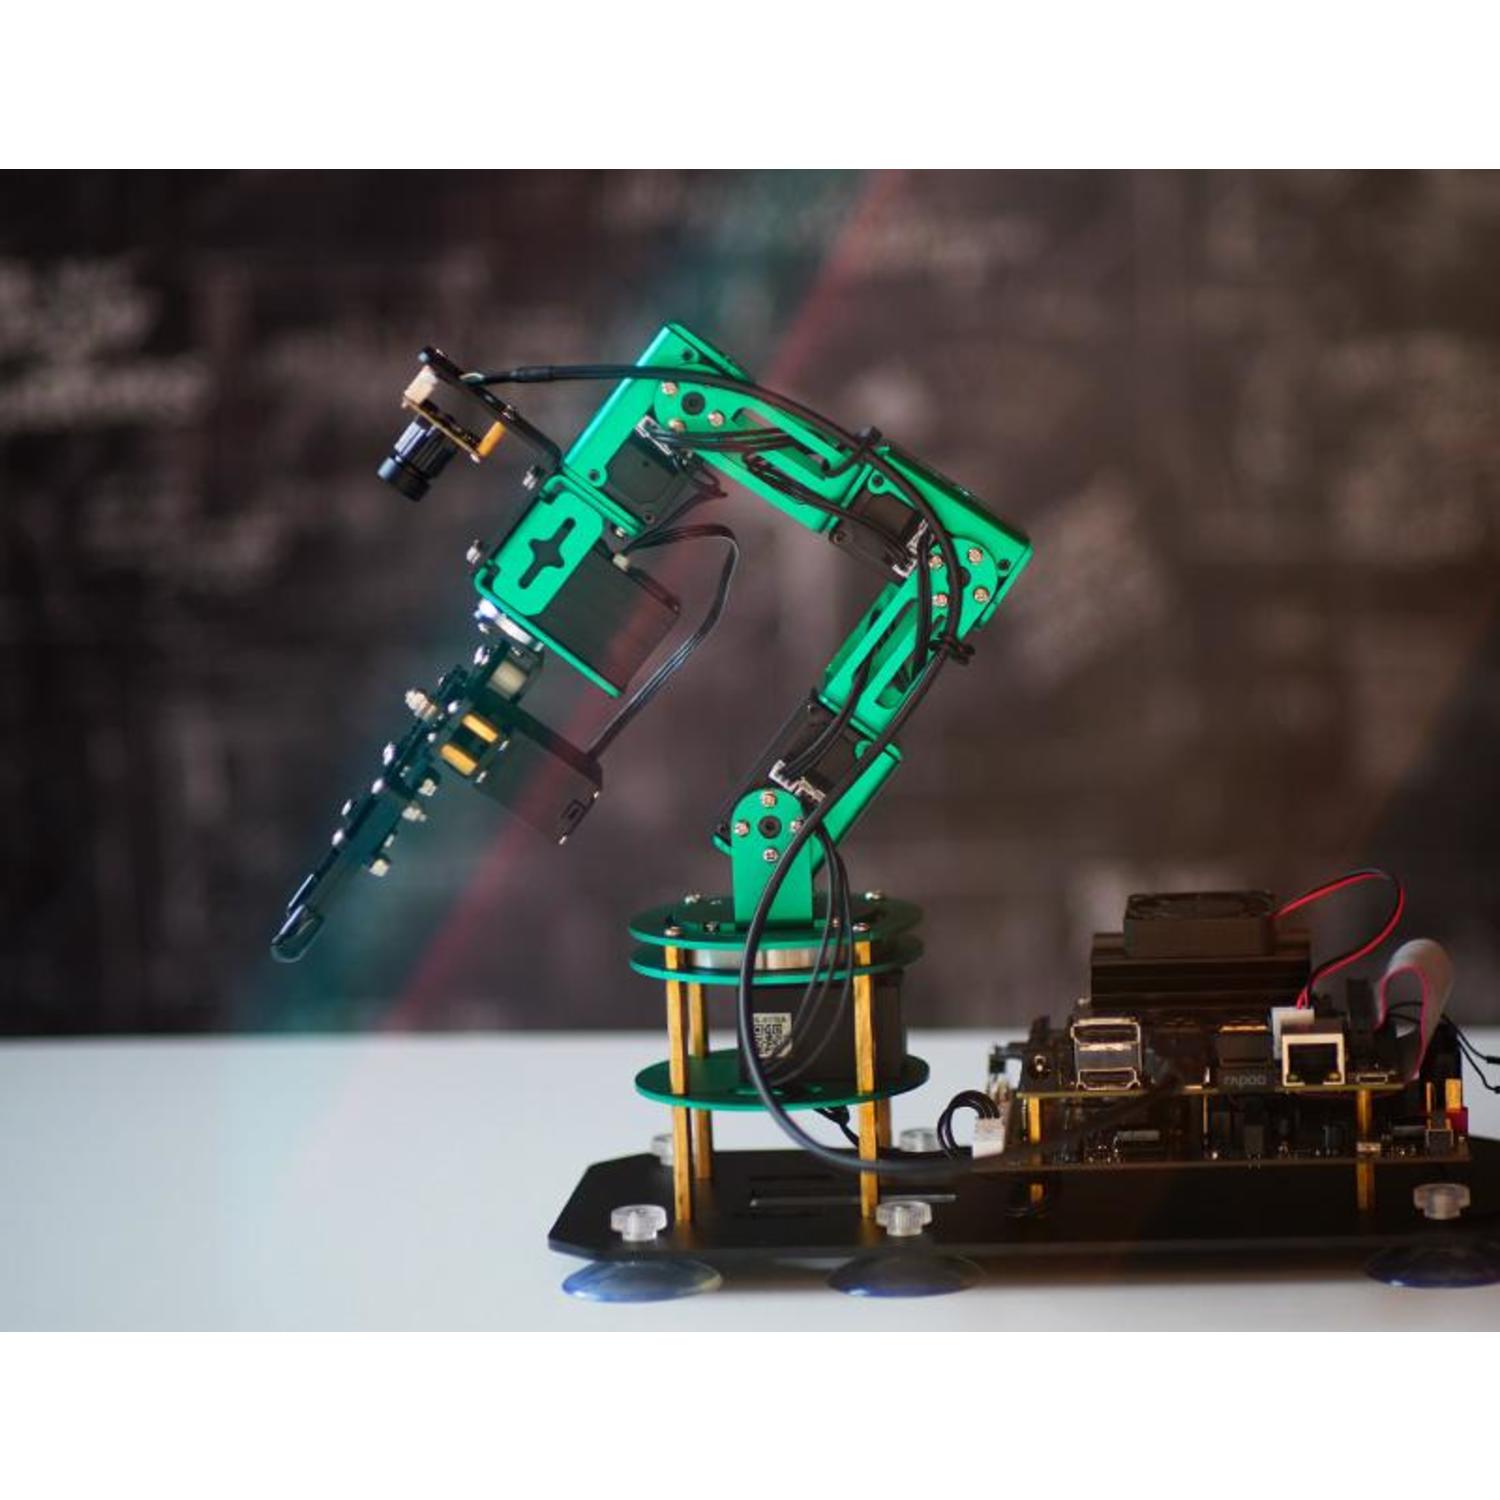 DOFBOT AI Vision Robotic Arm with ROS for Raspberry Pi 4B